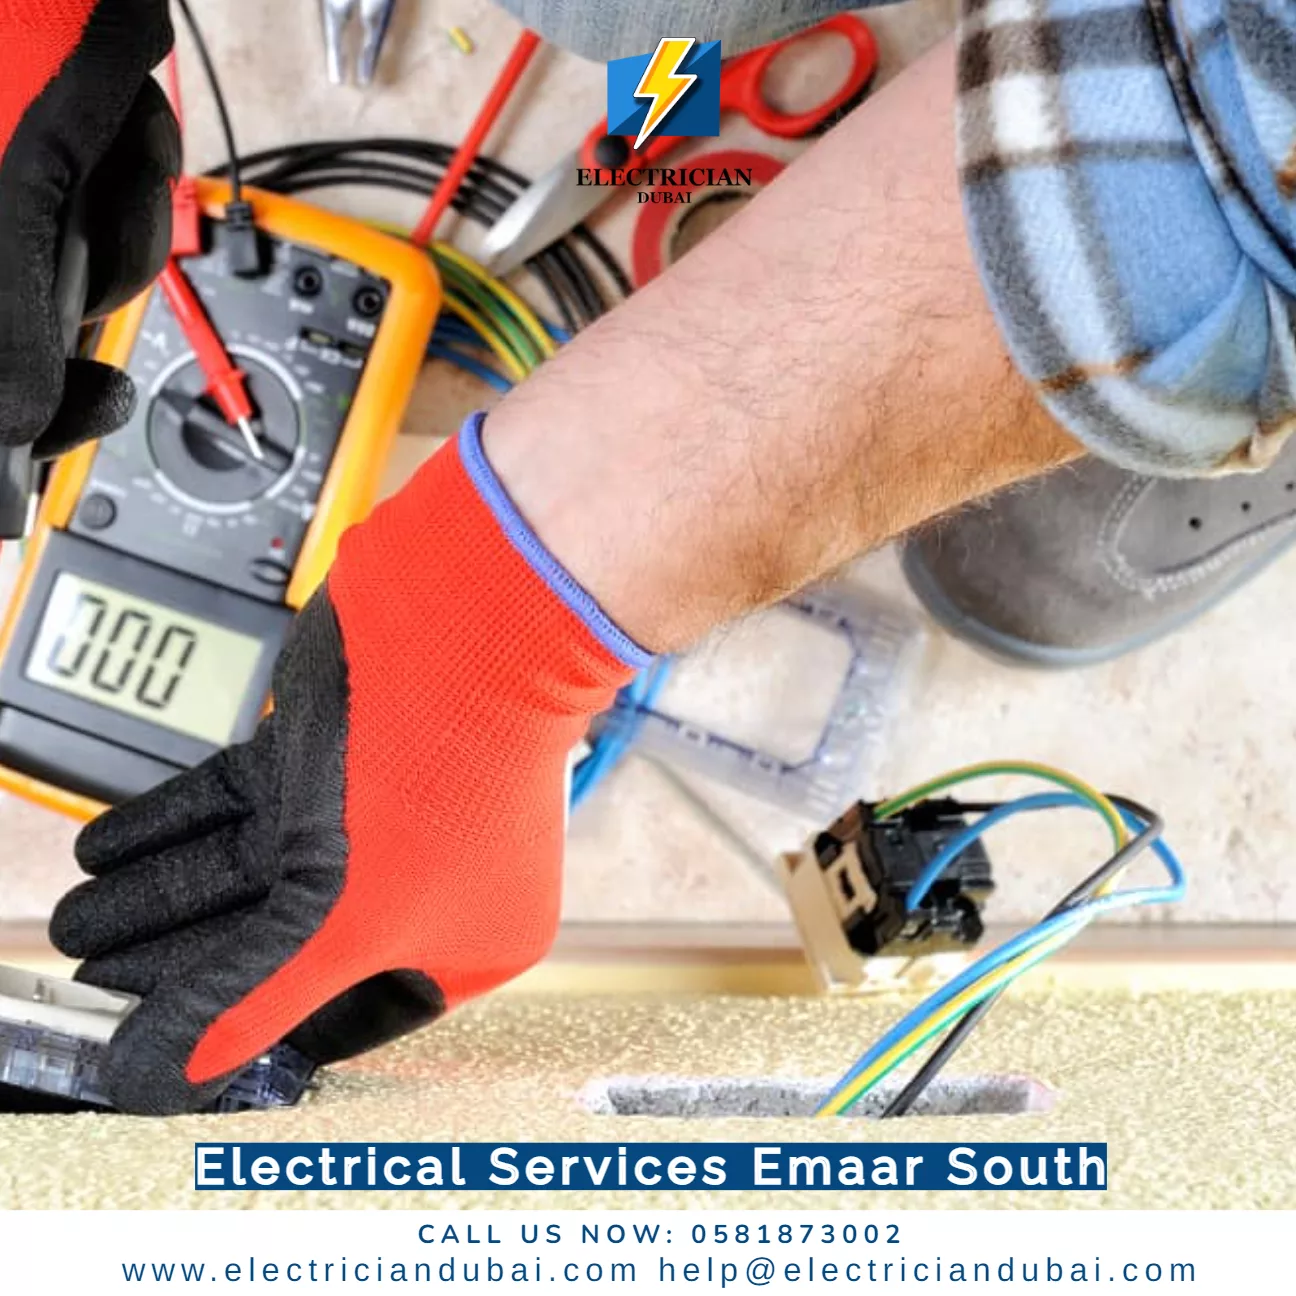 Electrical Services Emaar South